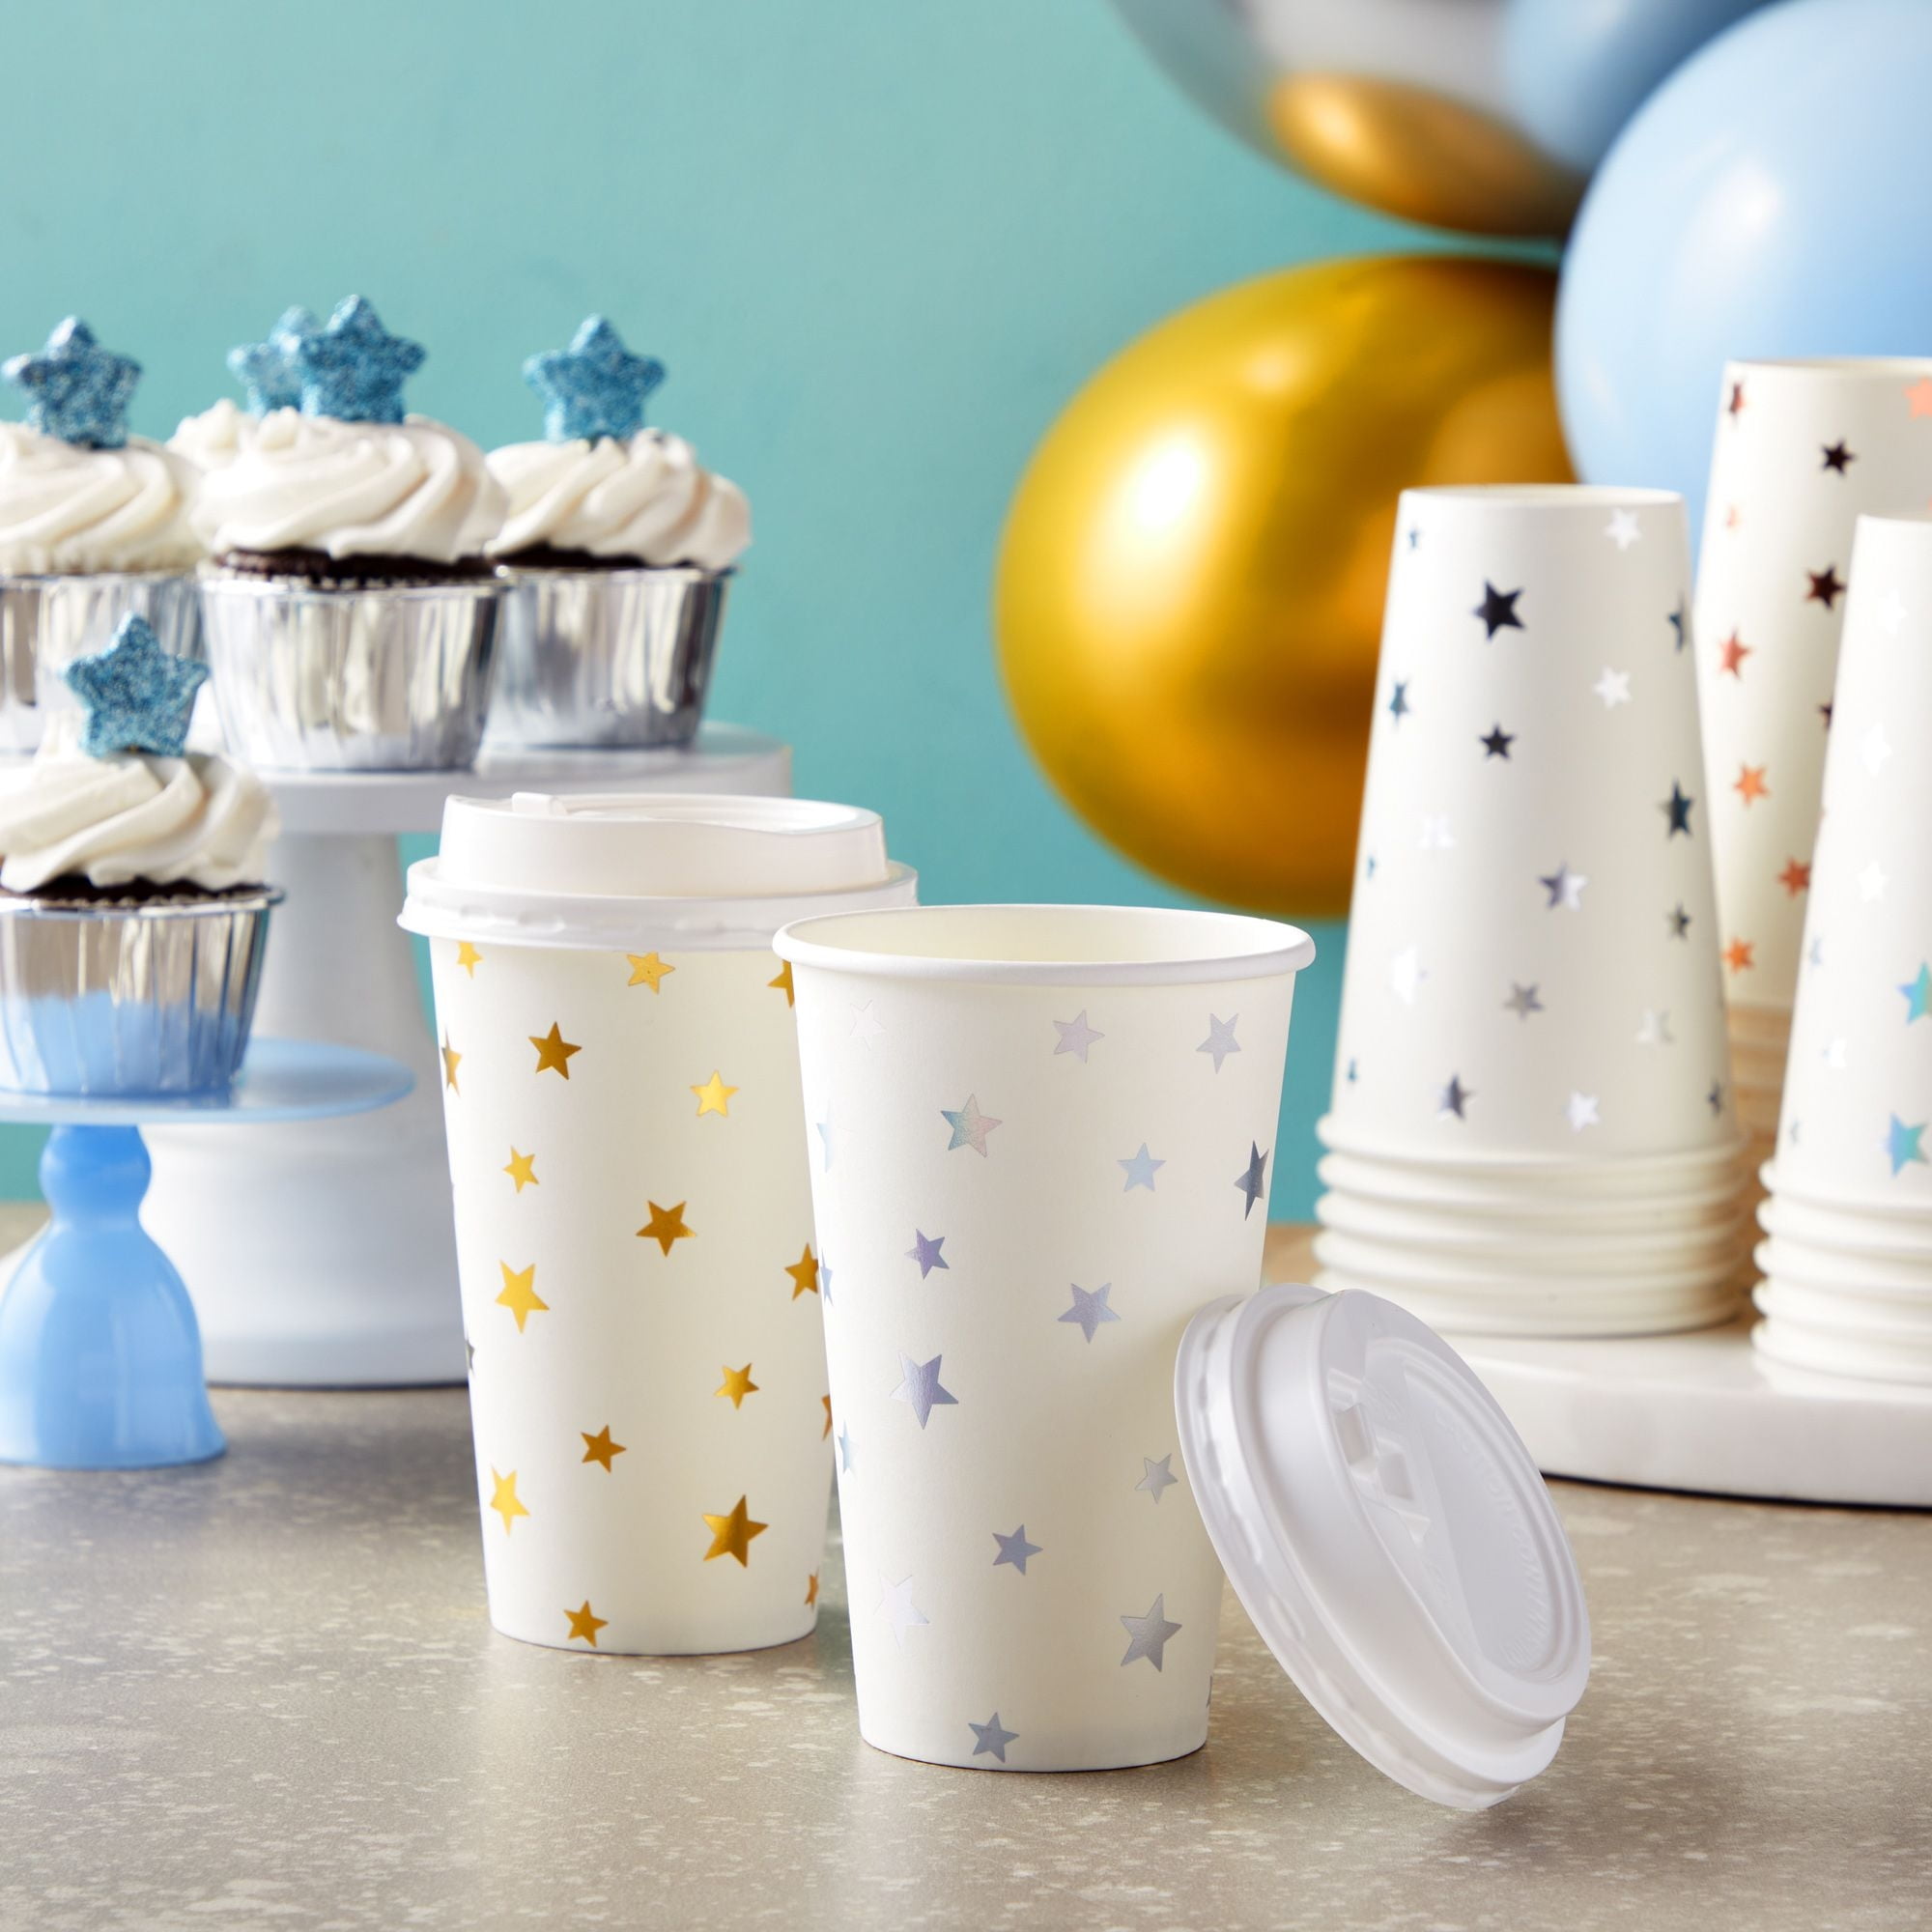 16 oz. Cute Patterns Stripes, Dots & Stars Disposable Paper Coffee Cups  with Lids - 12 Ct.